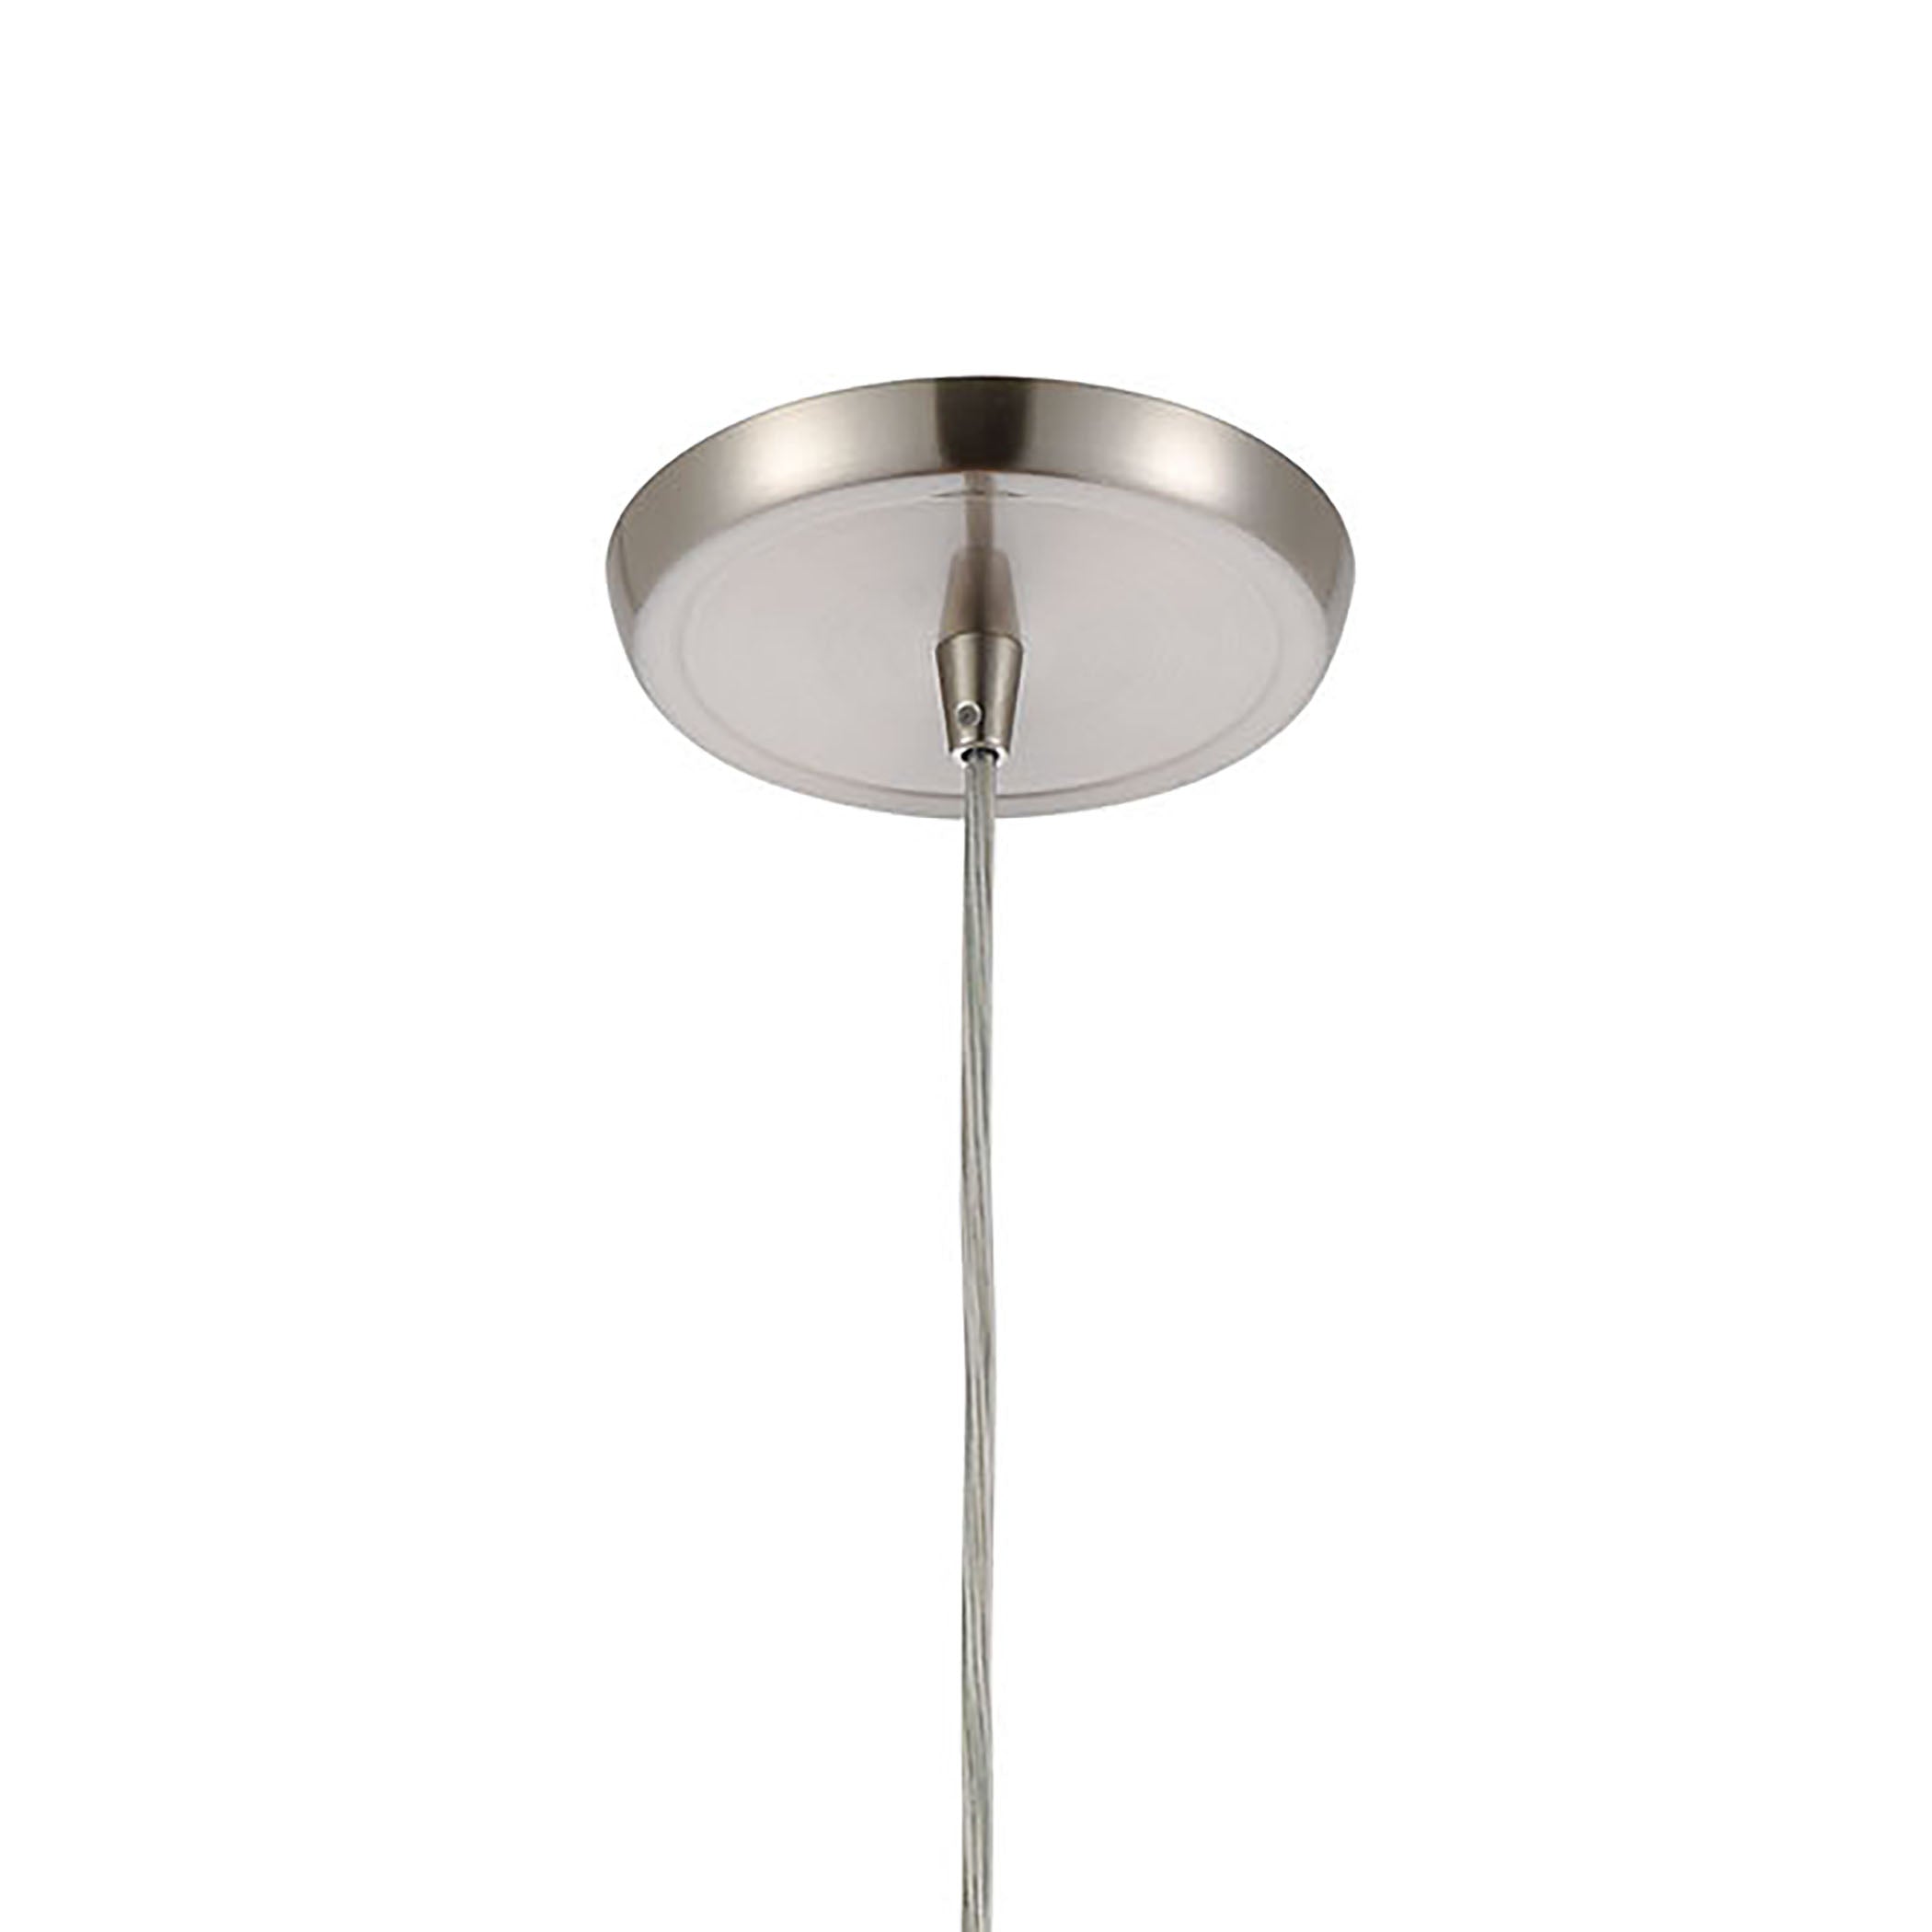 ELK Lighting 21192/1 Liz 1-Light Mini Pendant in Satin Nickel with Clear Glass with Ribbed Swirls